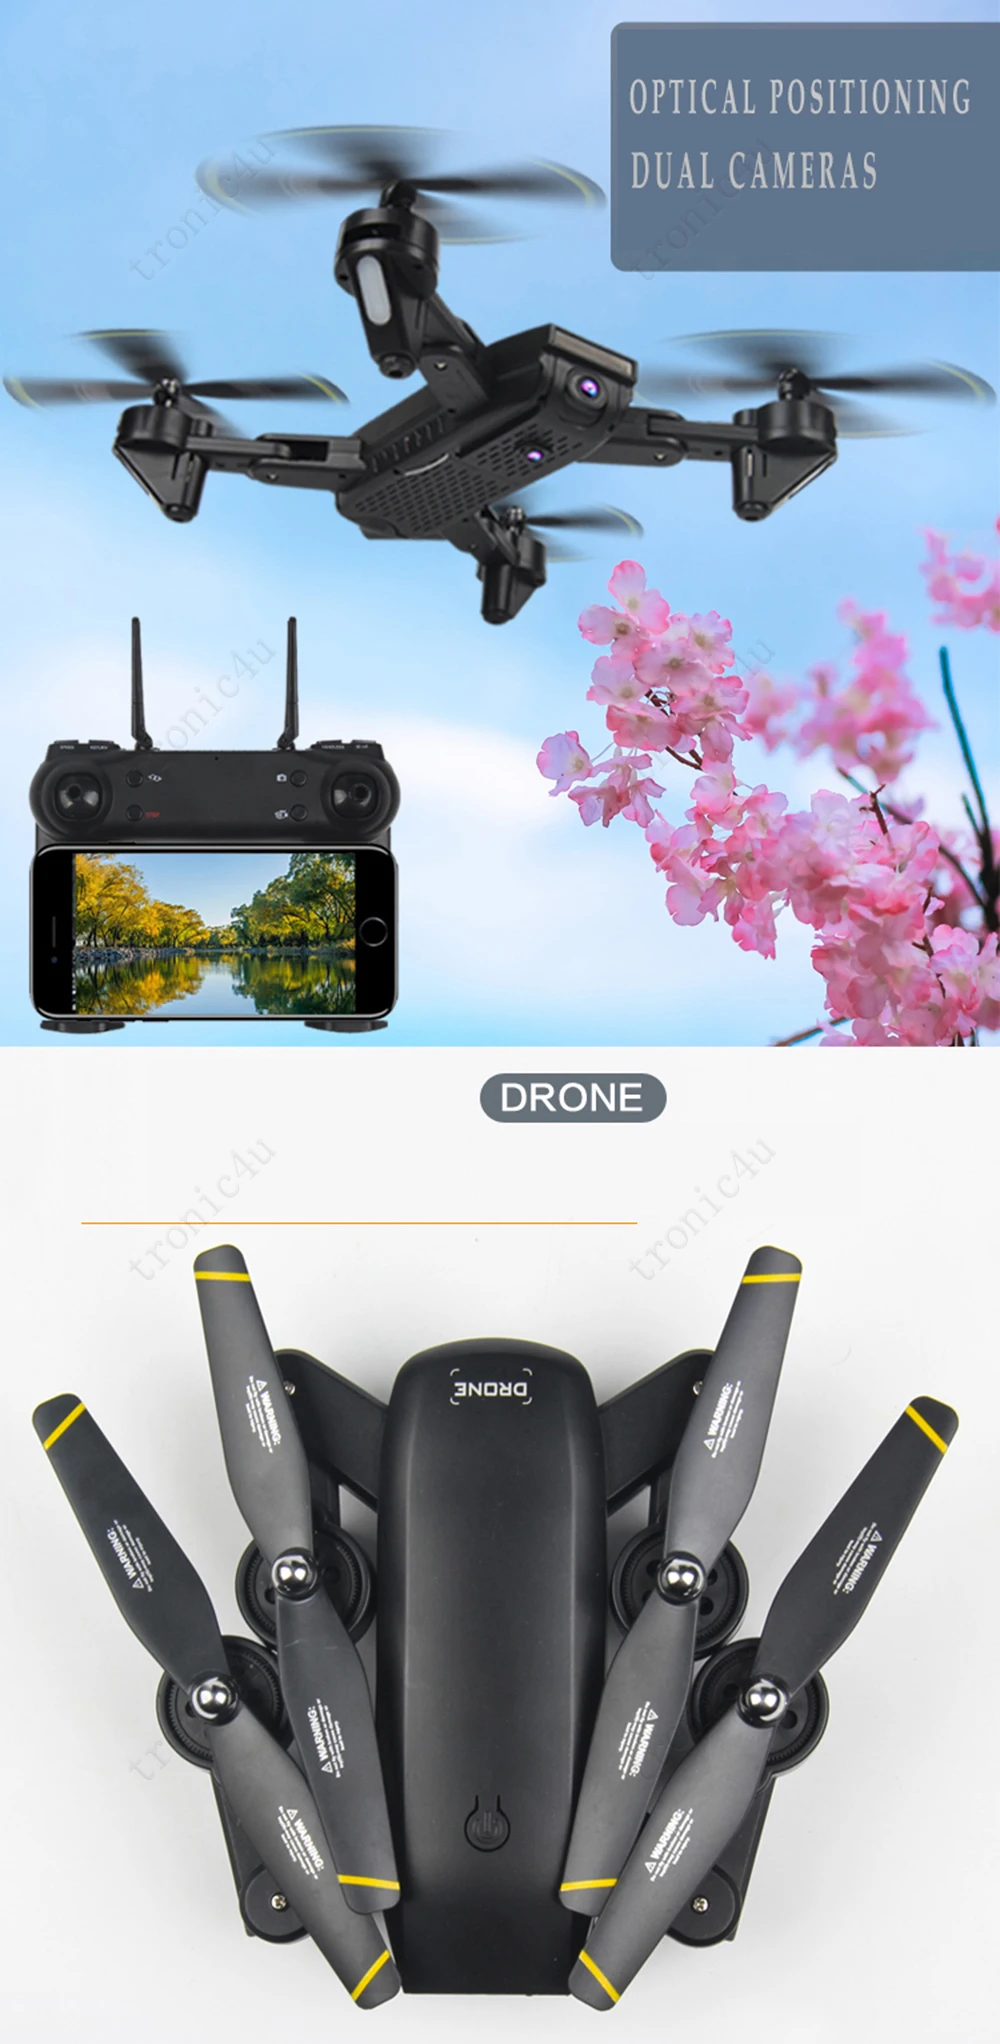 Cheapest Mini Foldable Drone Optical Flow Positioning Video Camera Hand Gesture Control Sensor RC Latest Aircraft 4k Battery